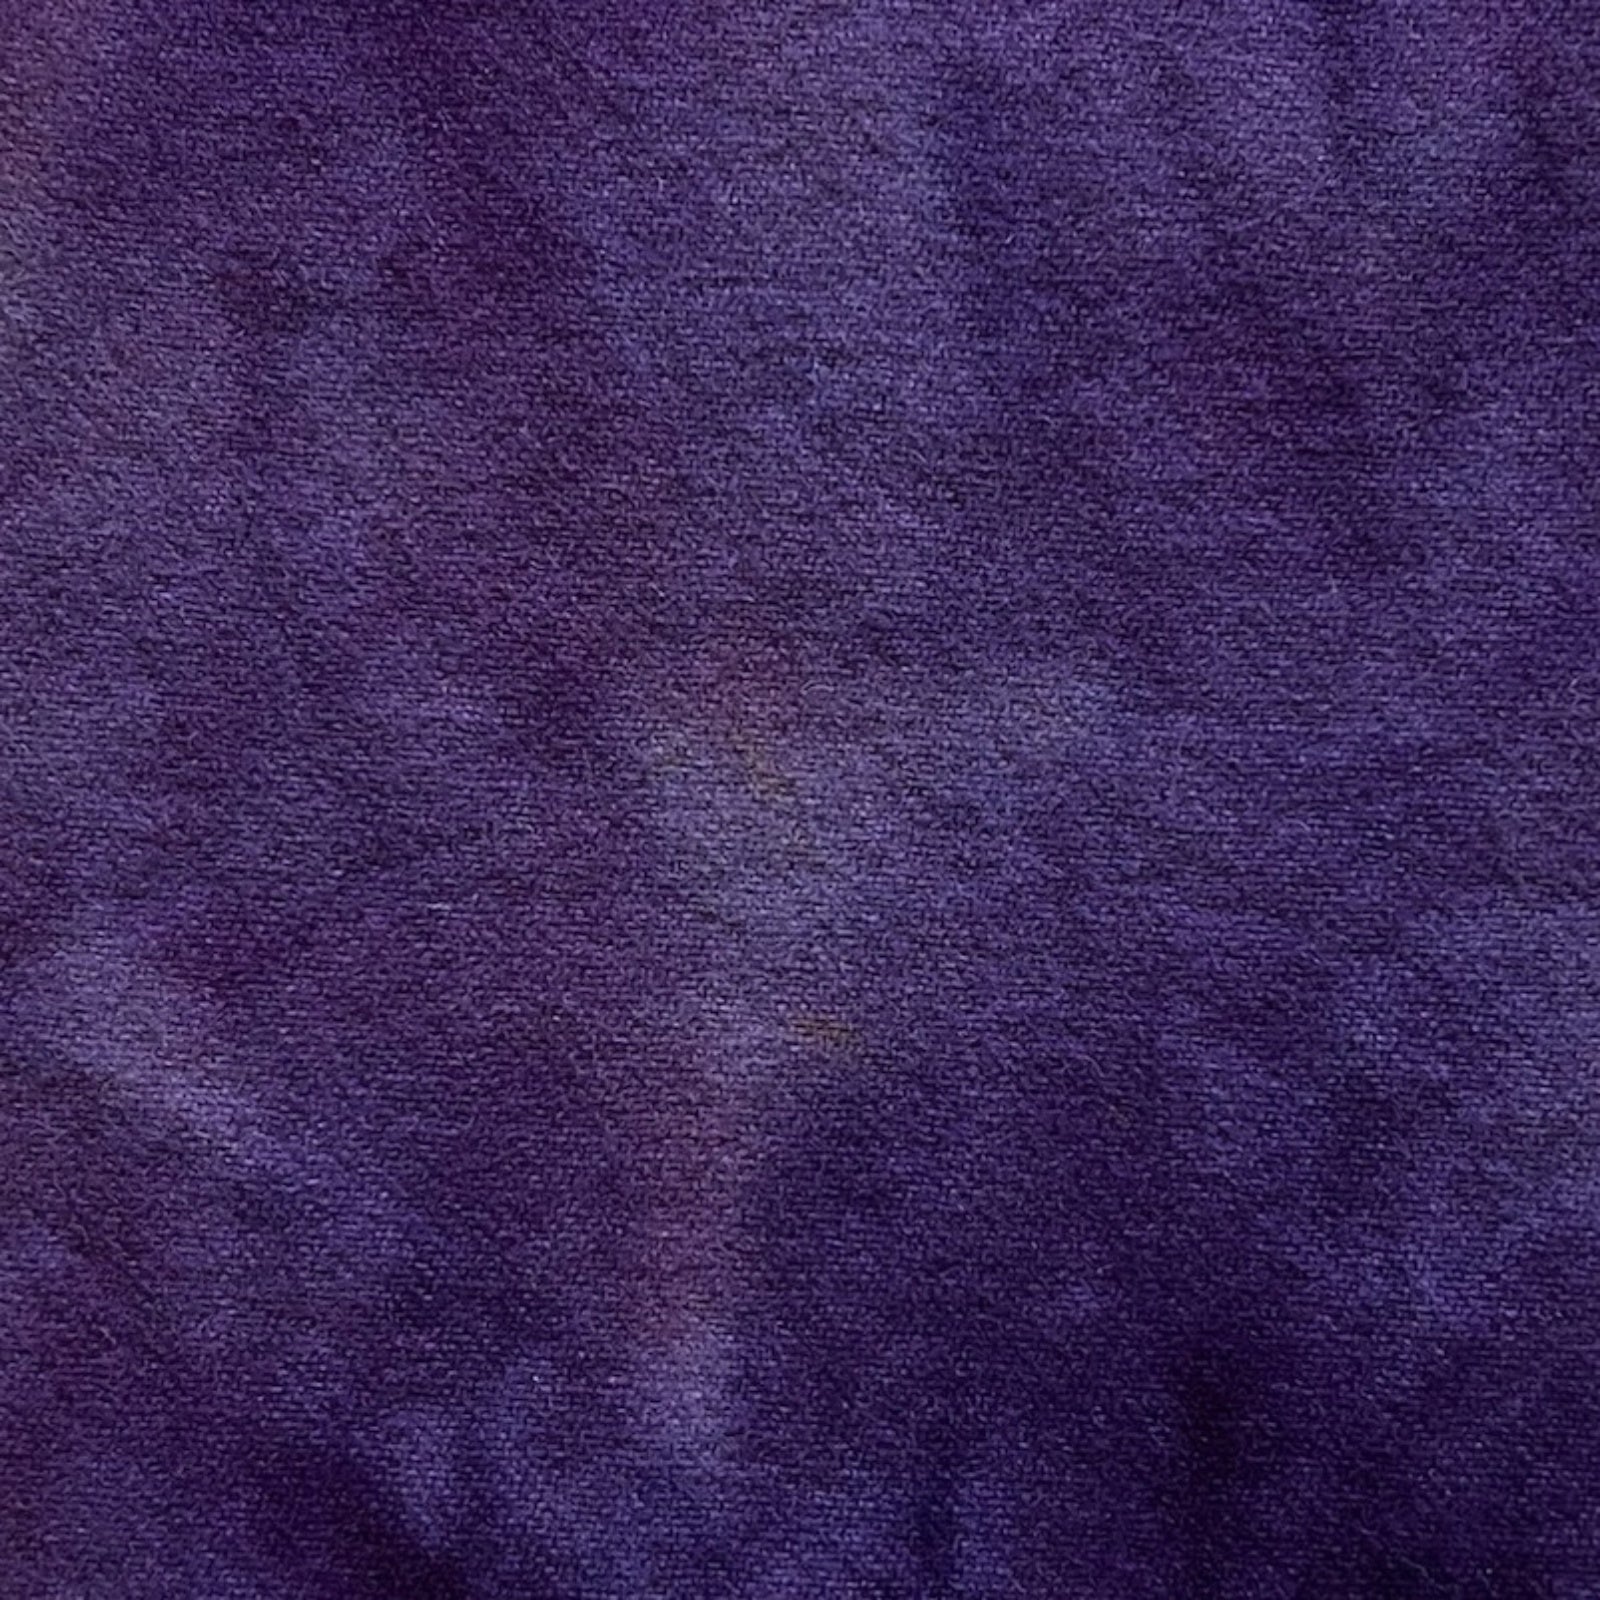 Royal Purple - Colorama Hand Dyed Wool - Offered by HoneyBee Hive Rug Hooking